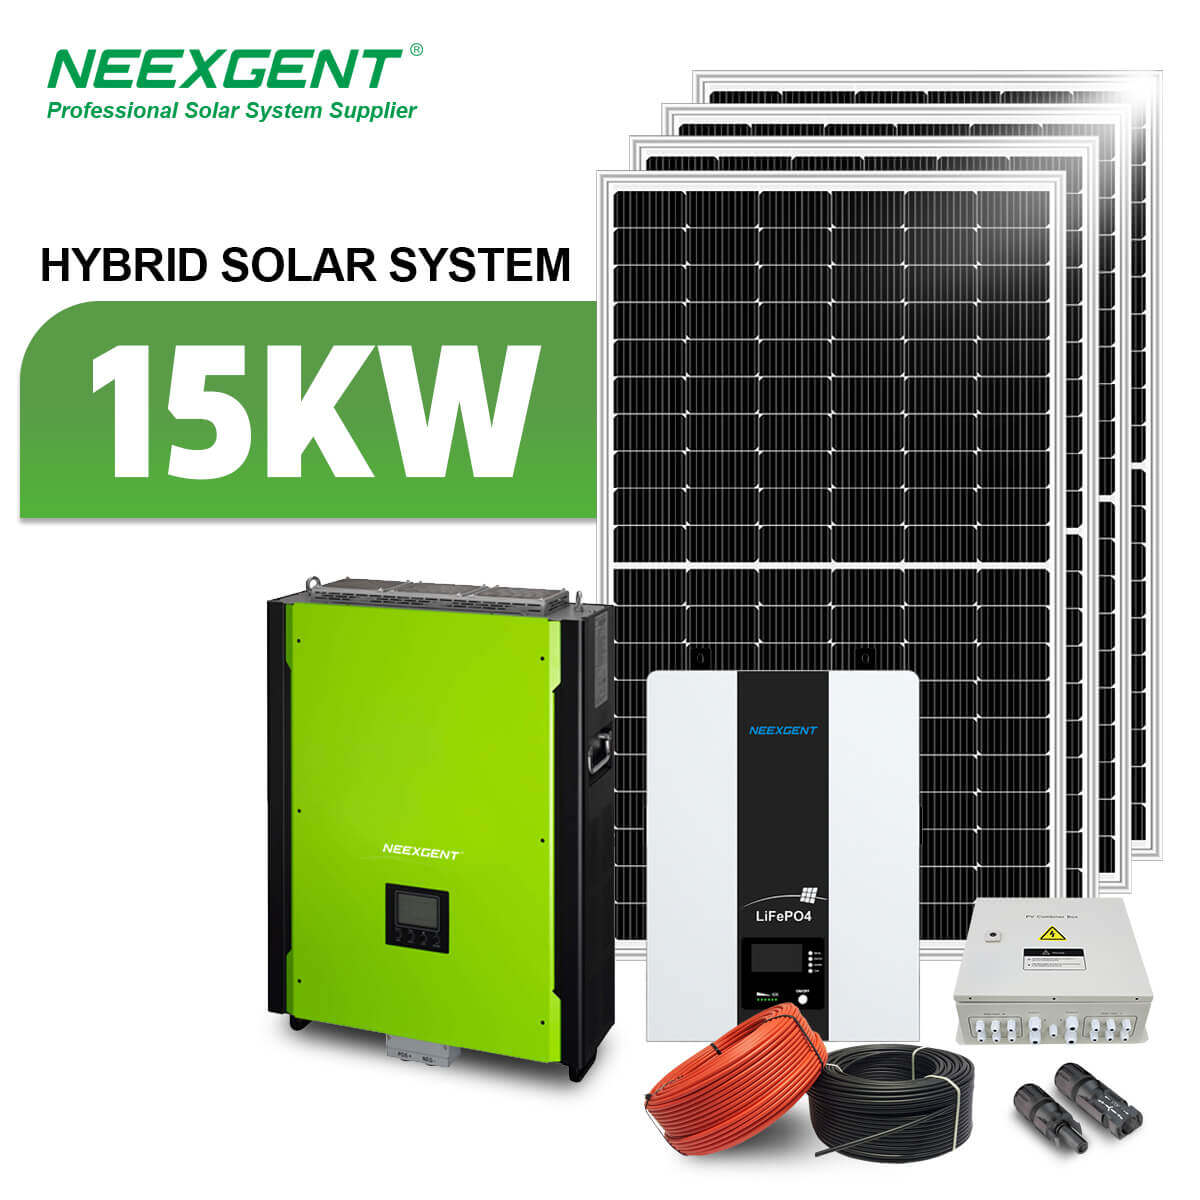 Neexgent Complete Solar Energy System Home 15kw Off Grid Hybrid Solar Panel Power System